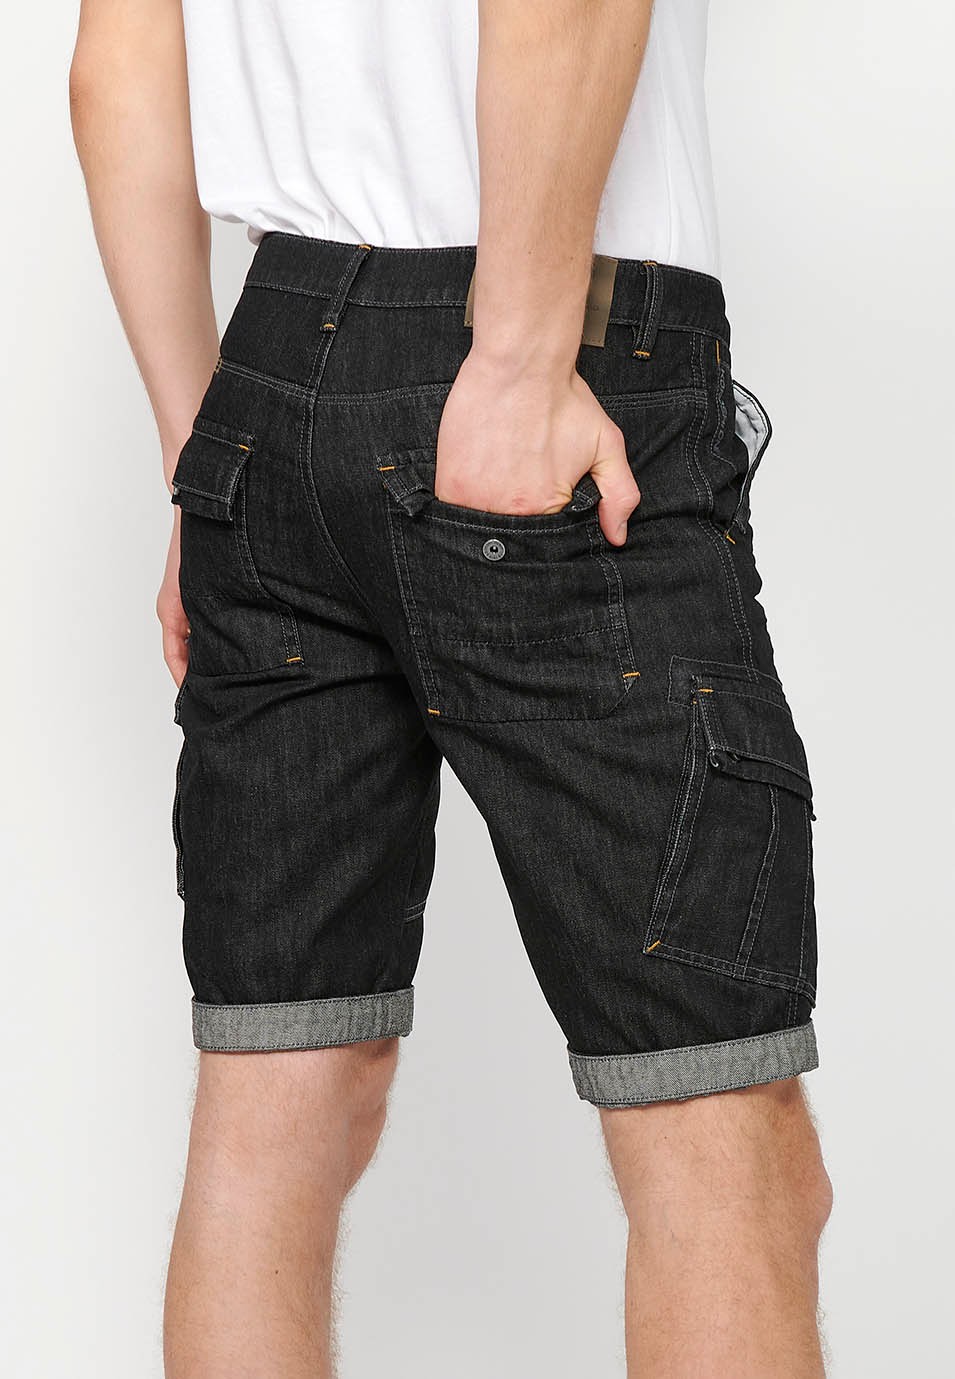 Denim Bermuda Shorts with Turn-Up Finish and Front Zipper and Button Closure with Pockets, One Ticket Pocket and Two Side Pockets in Black for Men 4